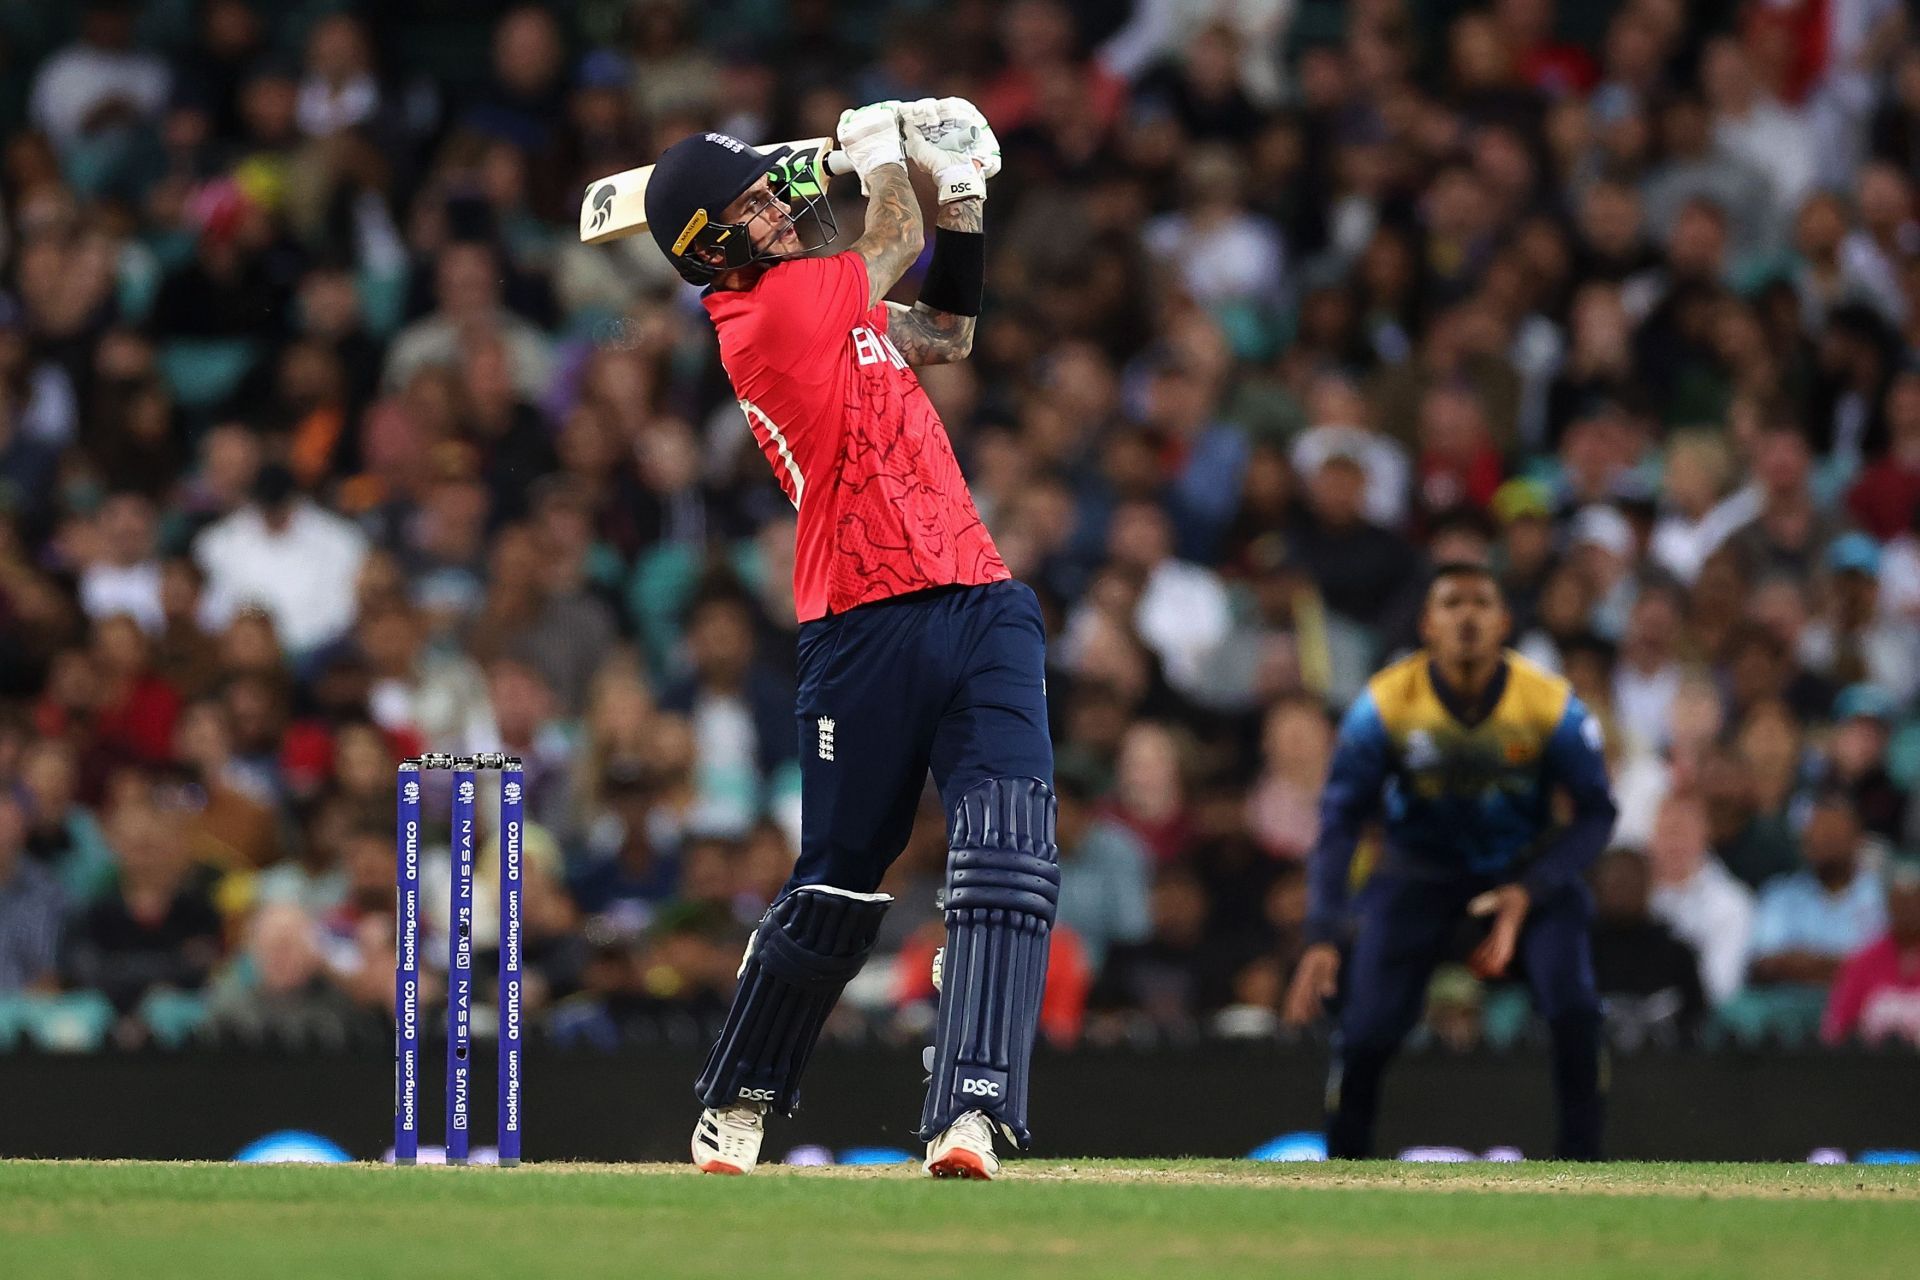 Alex Hales has been in terrific form for England at the top of the order. Pic: Getty Images